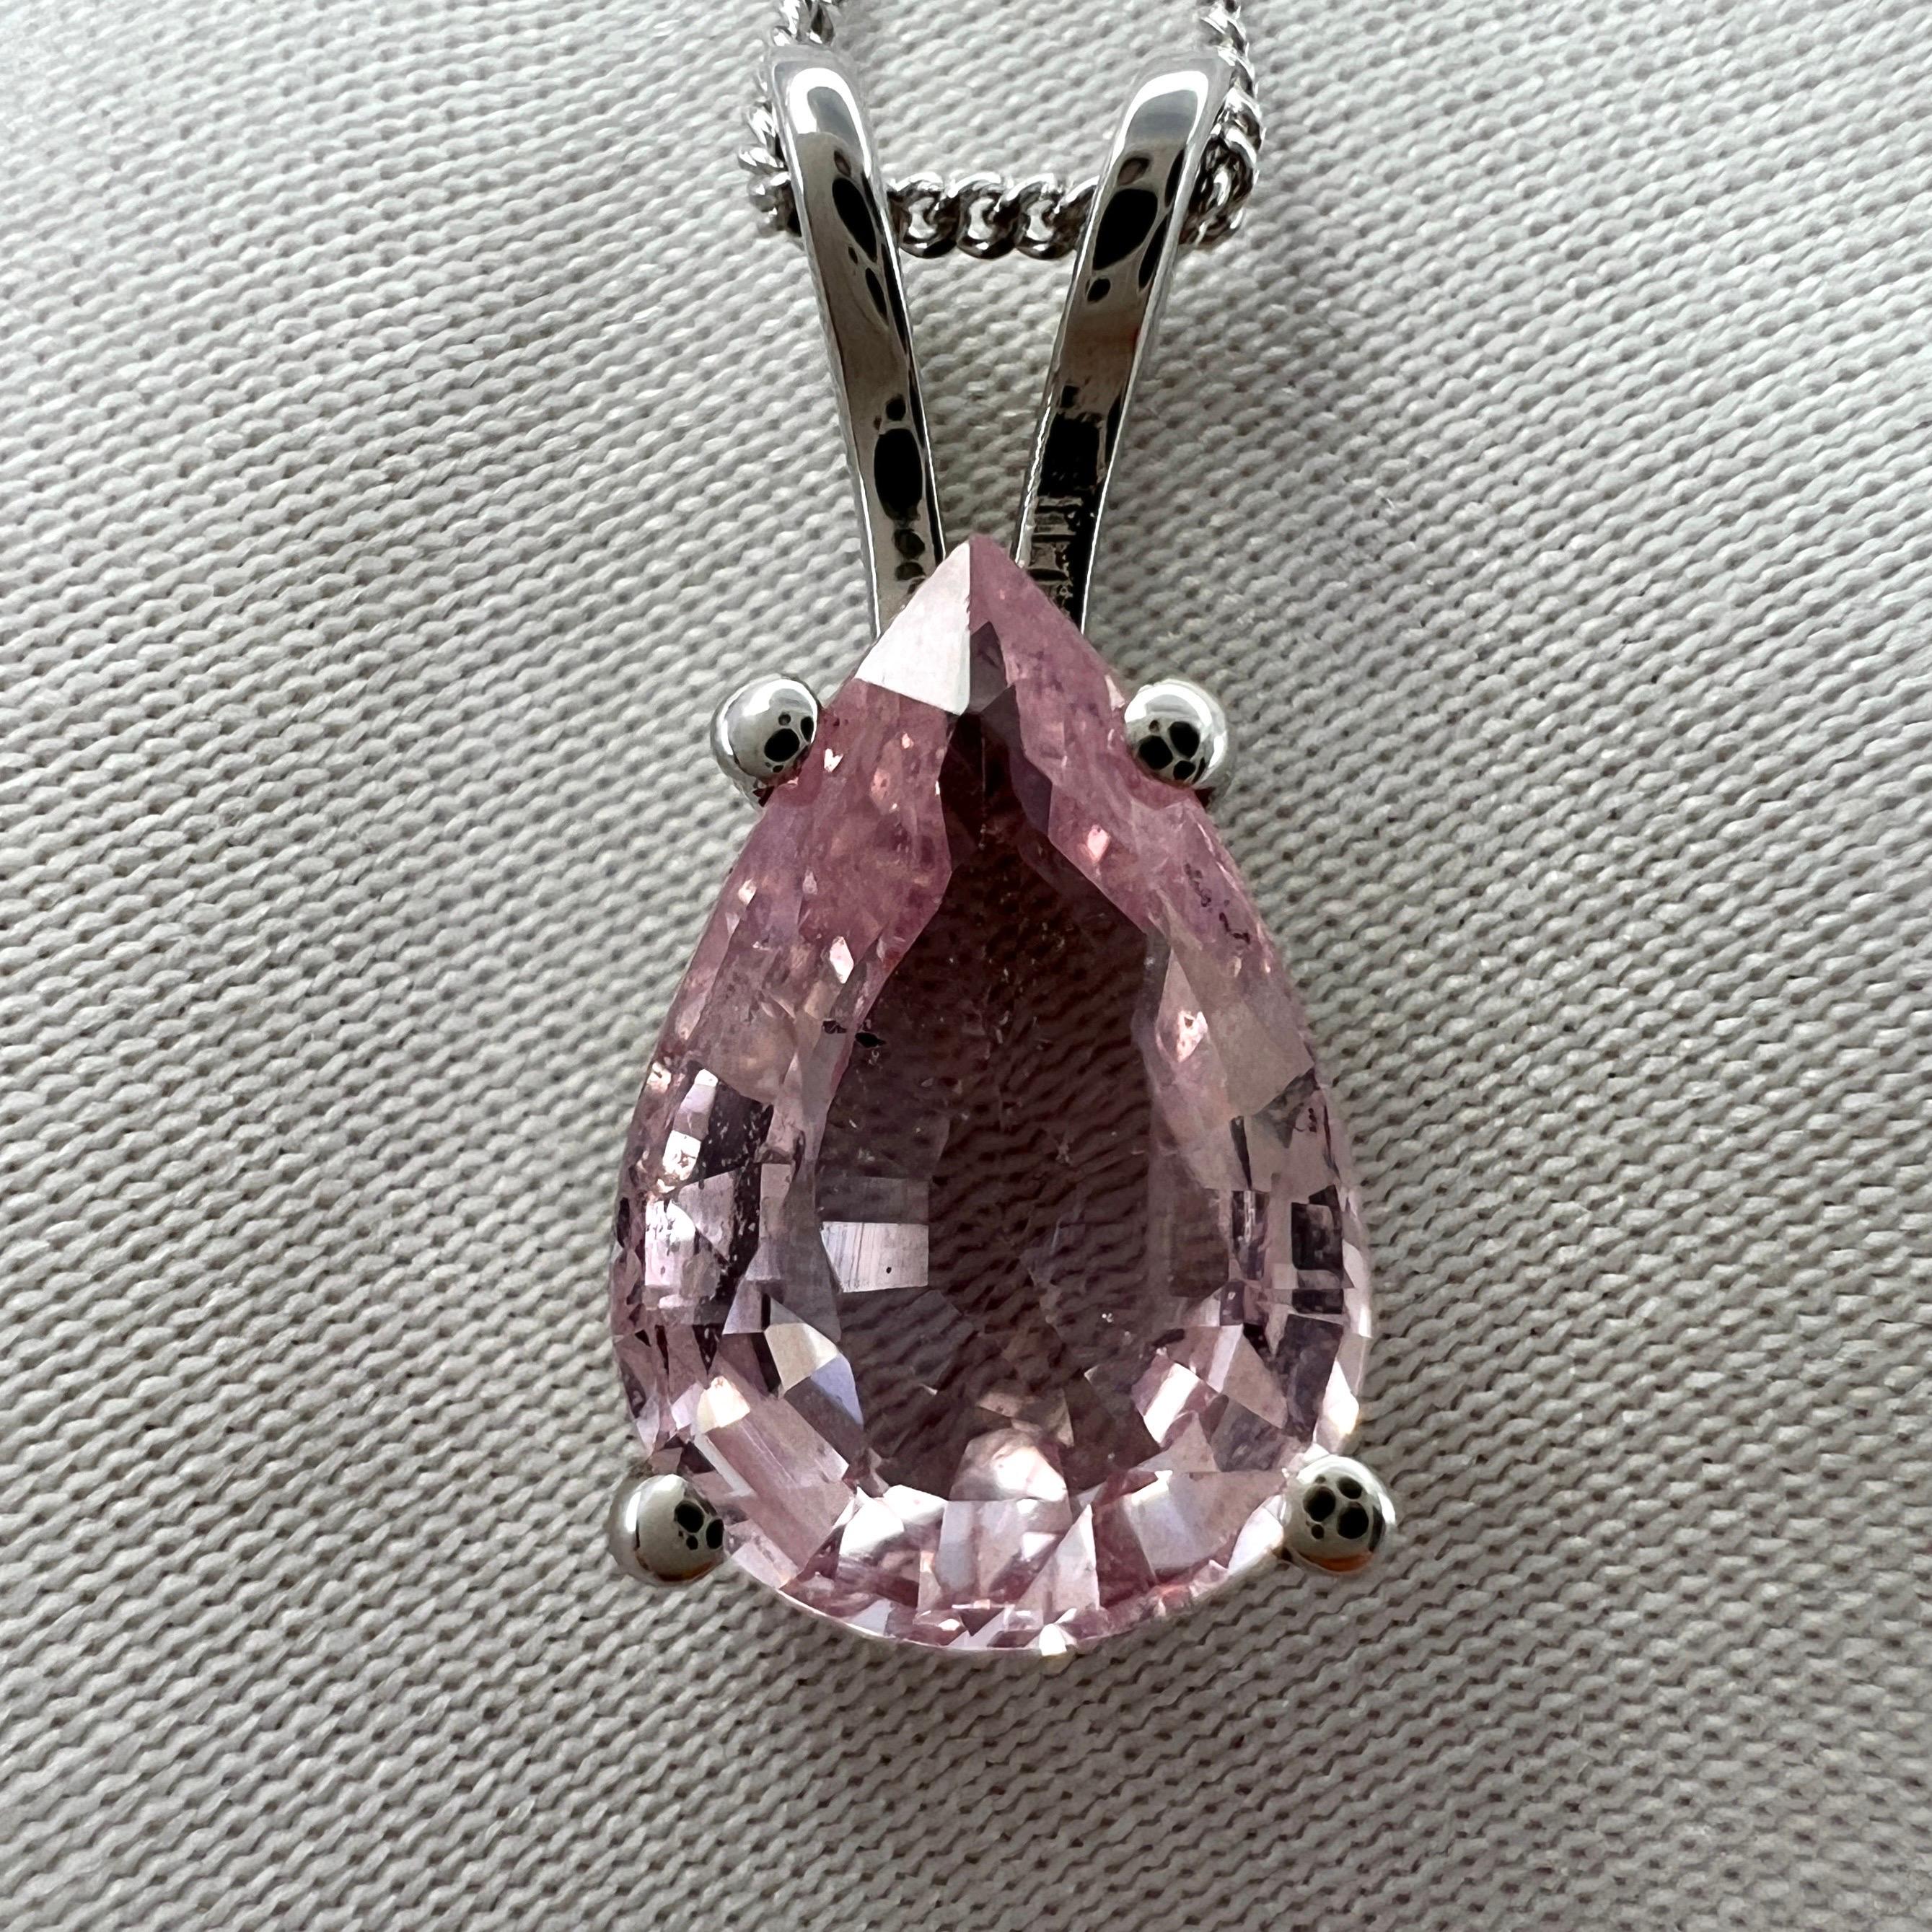 Natural Light Pink Sapphire Pear/Teardrop Cut 18k White Gold Solitaire Pendant.

2.50 Carat sapphire with a beautiful pink colour and very good clarity, clean stone with only some small natural inclusions visible when looking closely. 
Also has a